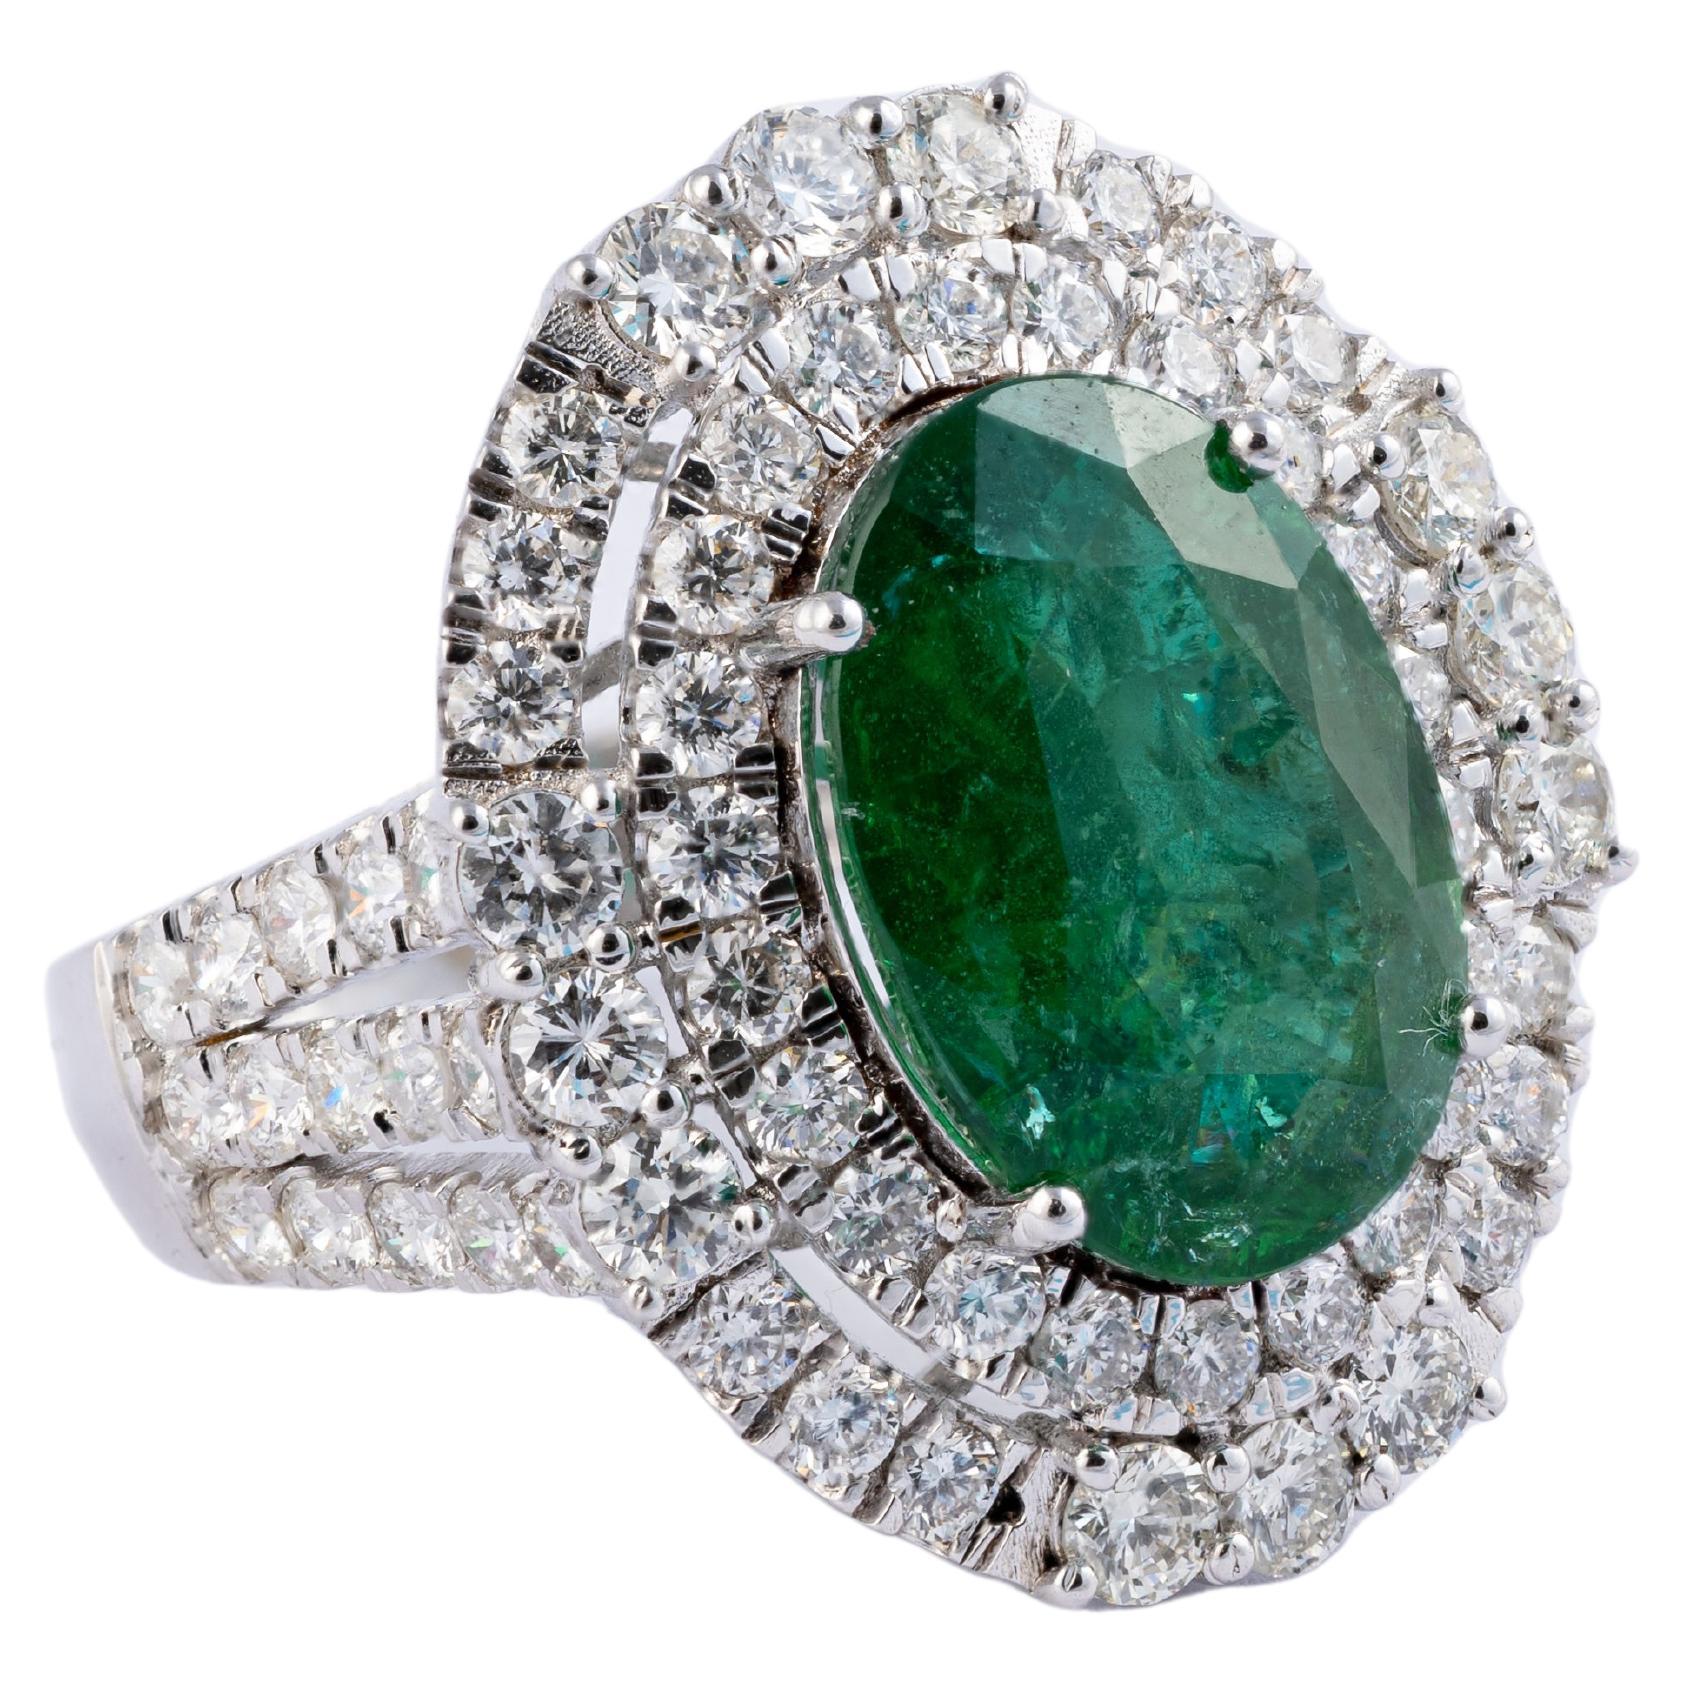 Natural Zambian Emerald 5.97cts with Diamonds 2.74cts ring and 14k Gold